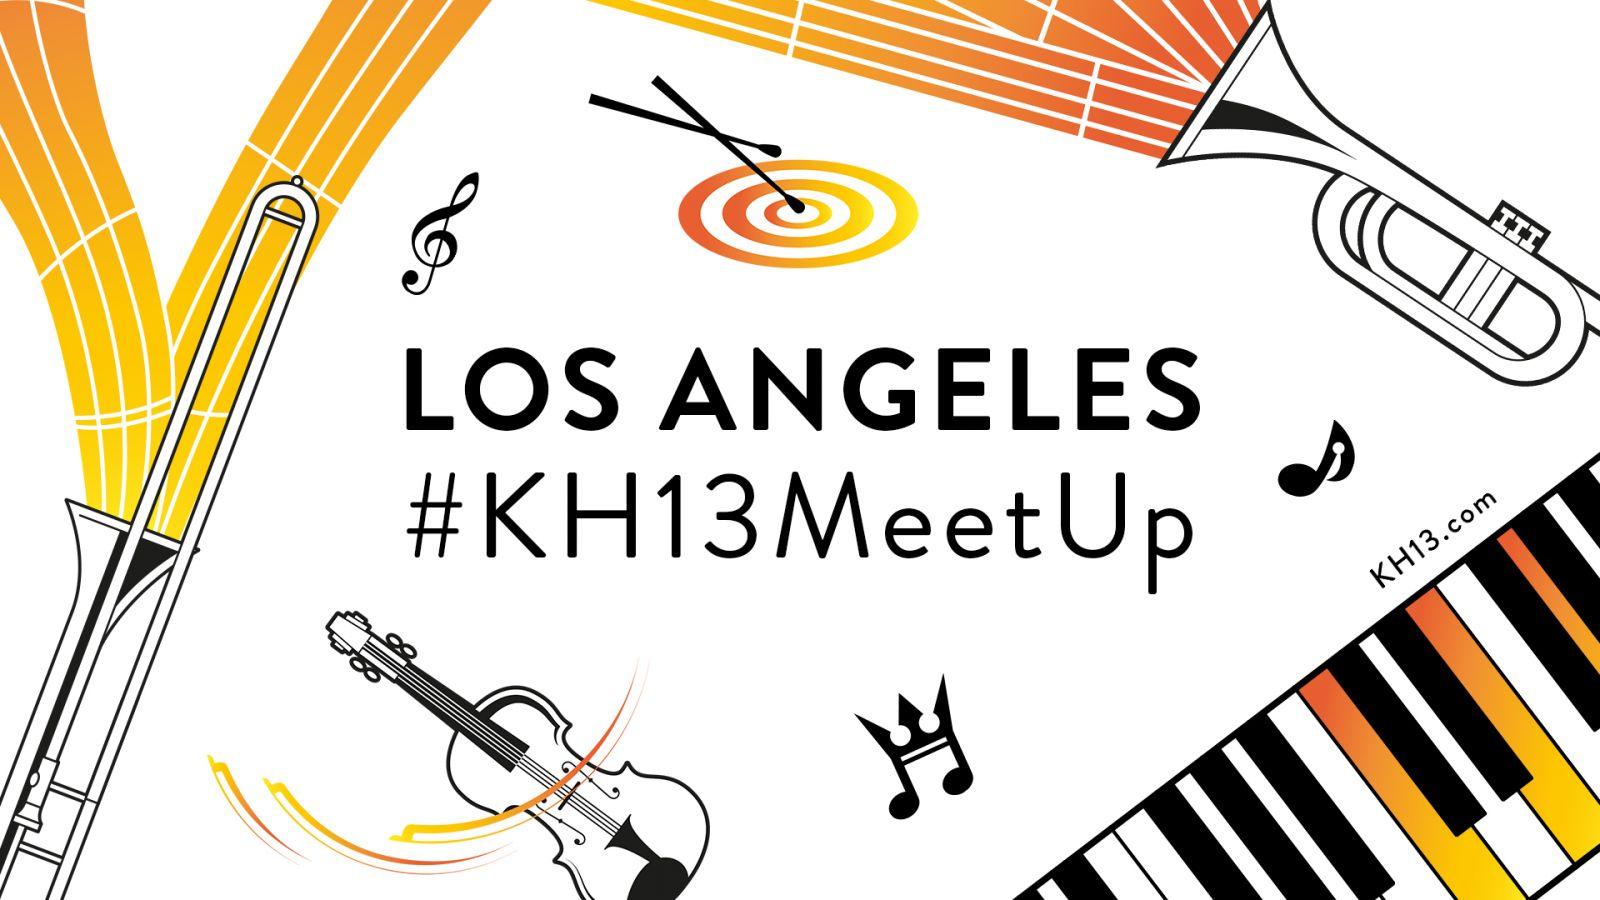 KH13 Meetup for Los Angeles concert